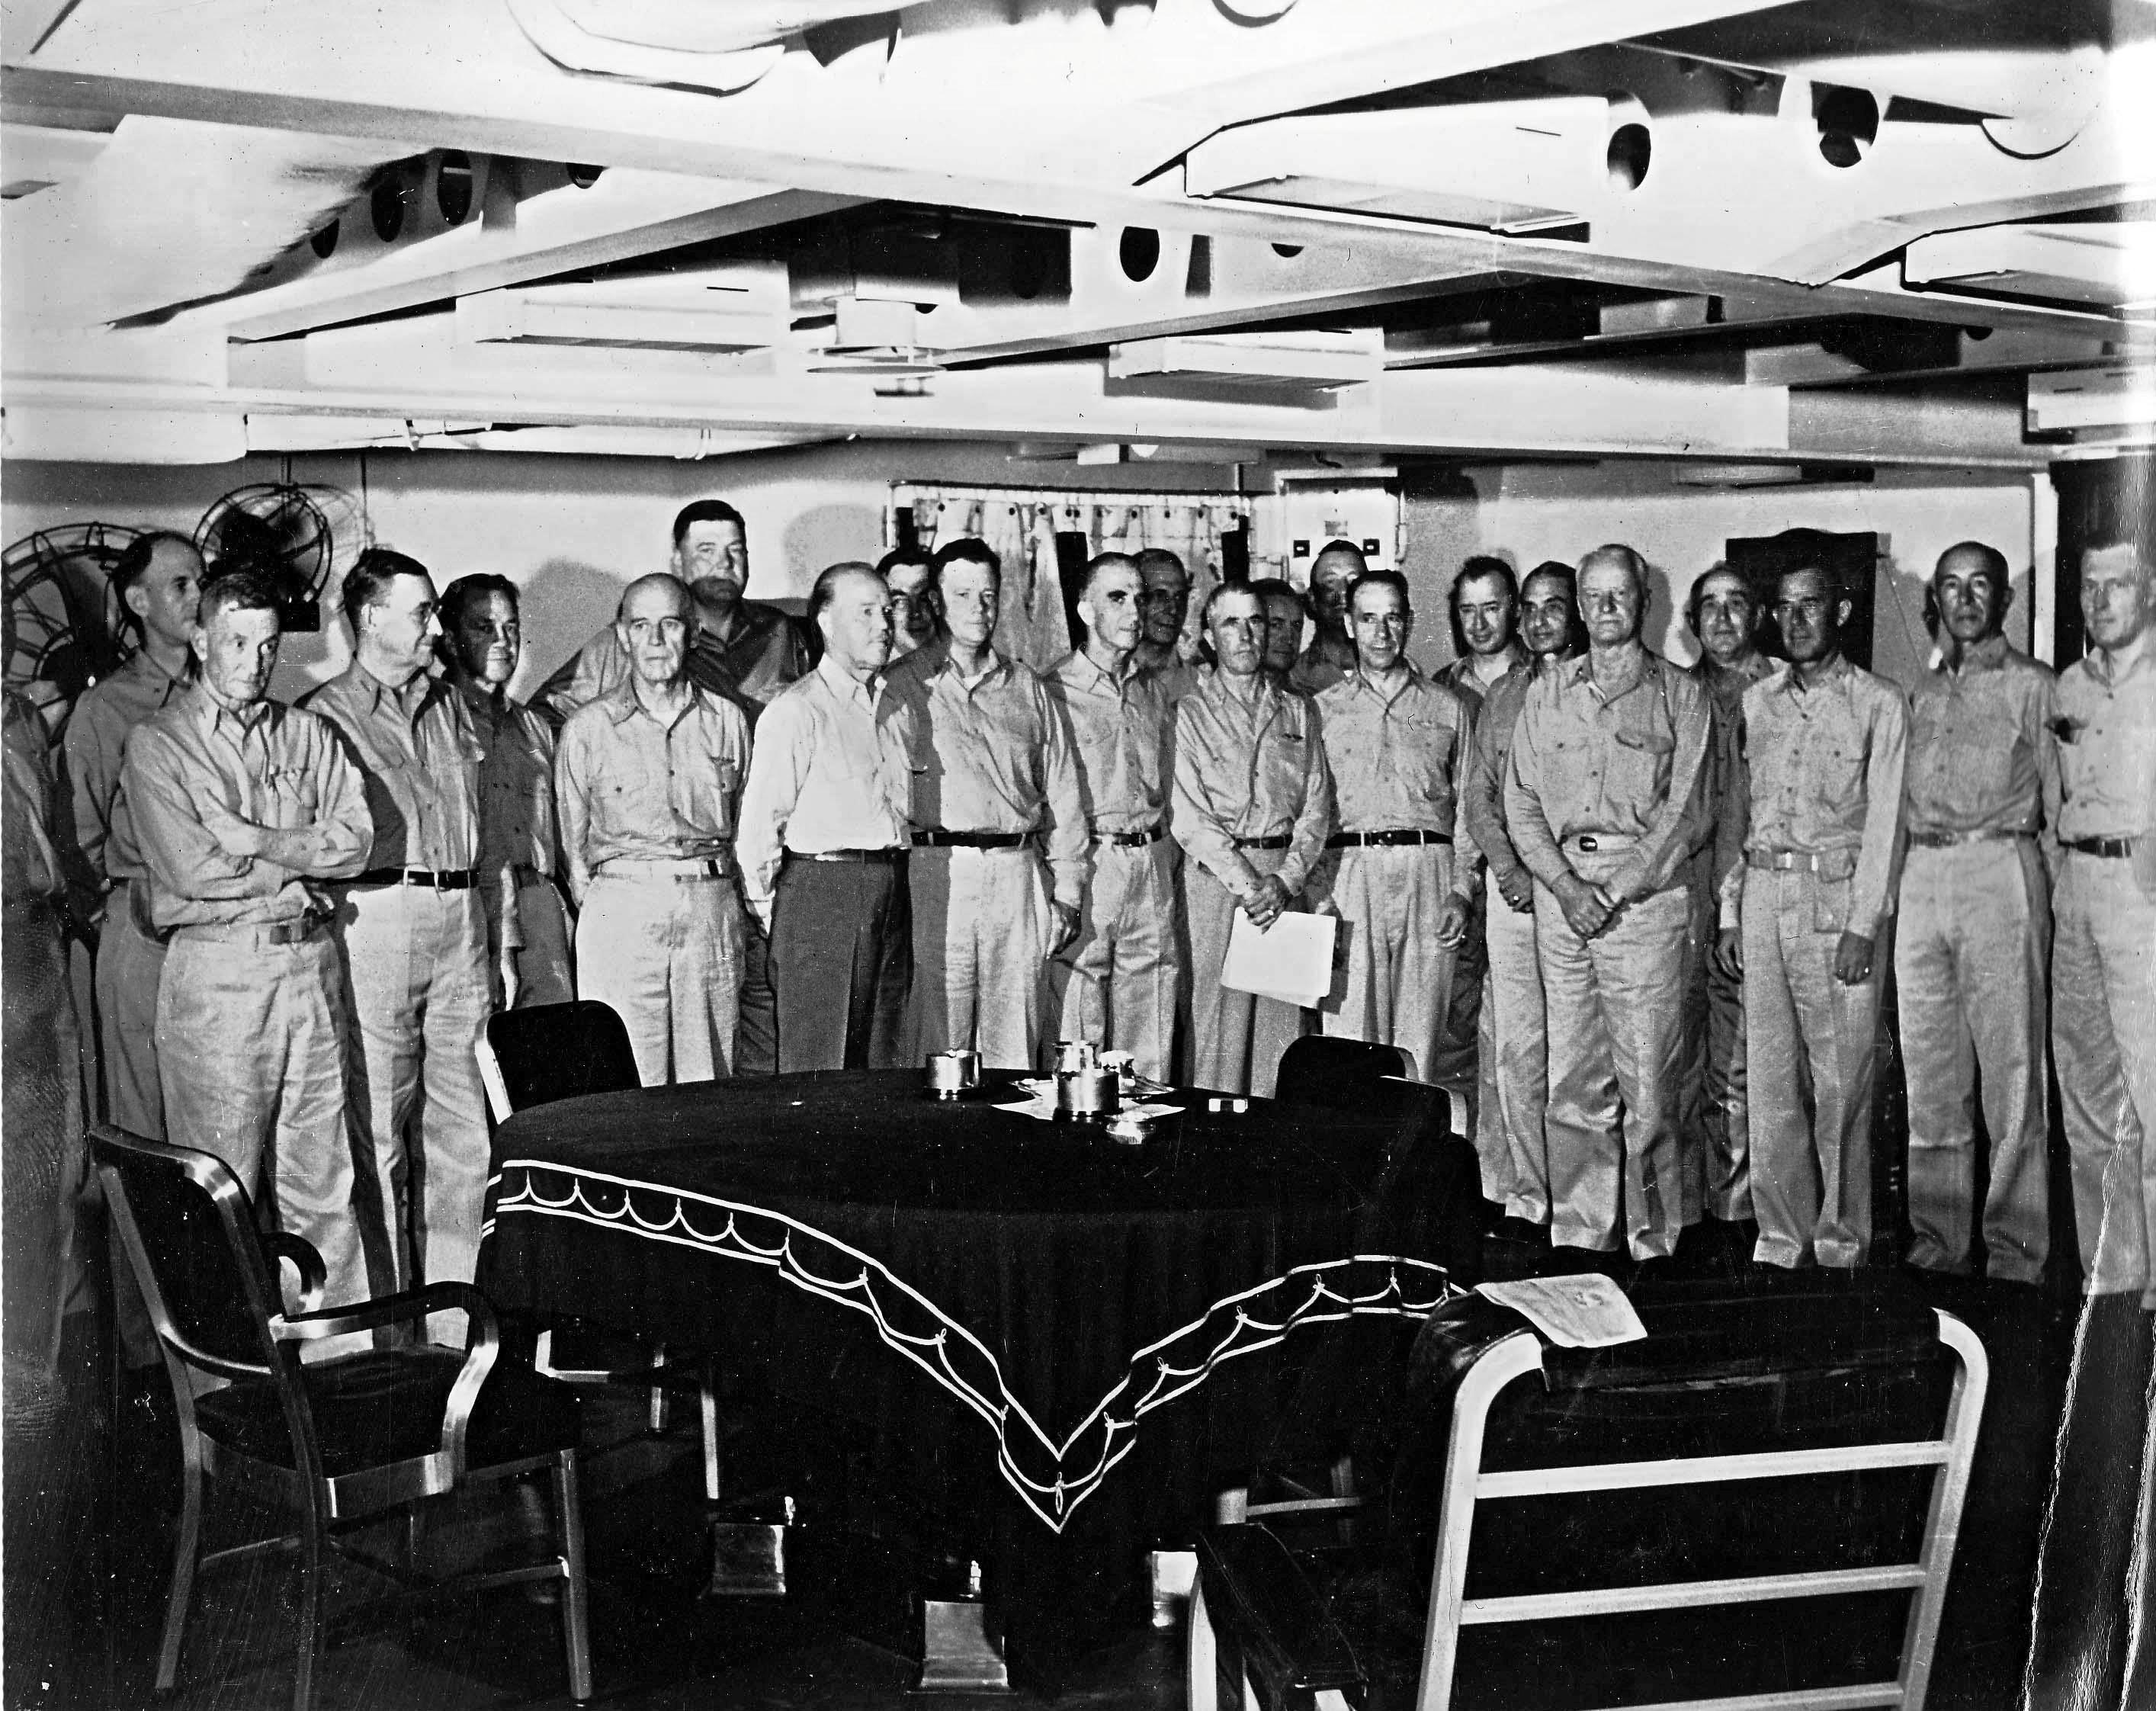 Newly promoted Fleet Admiral Chester Nimitz hosting a collection of Third Fleet flag officers aboard battleship USS New Jersey in Ulithi Lagoon, Caroline Islands, Christmas Eve, 1944.